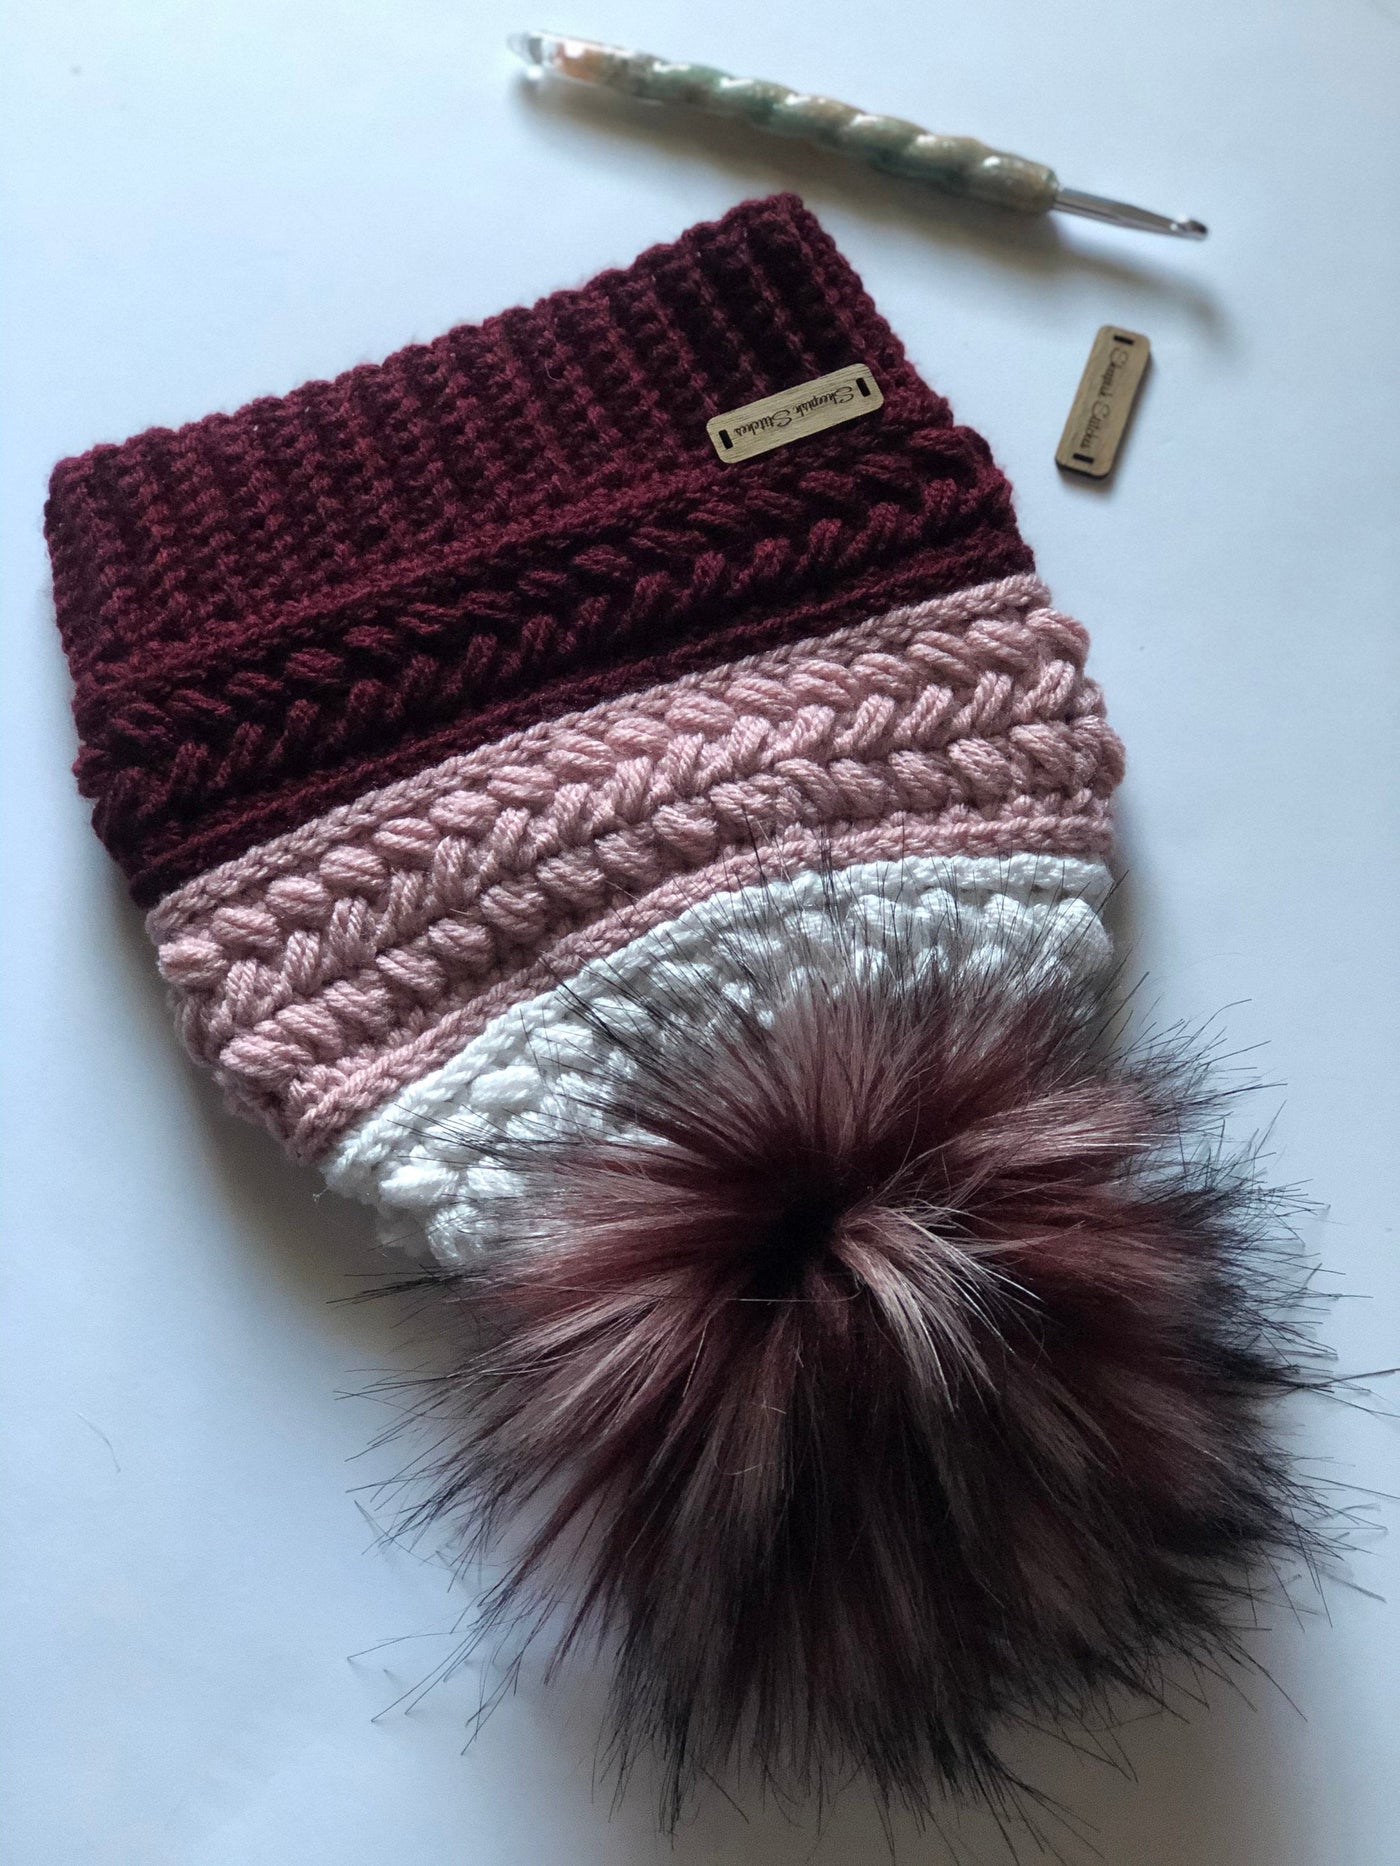 Burgundy, Blush, and White Hand Crocheted Beanie with faux fur Pom Pom, toque, hat, cap, woman’s gifts